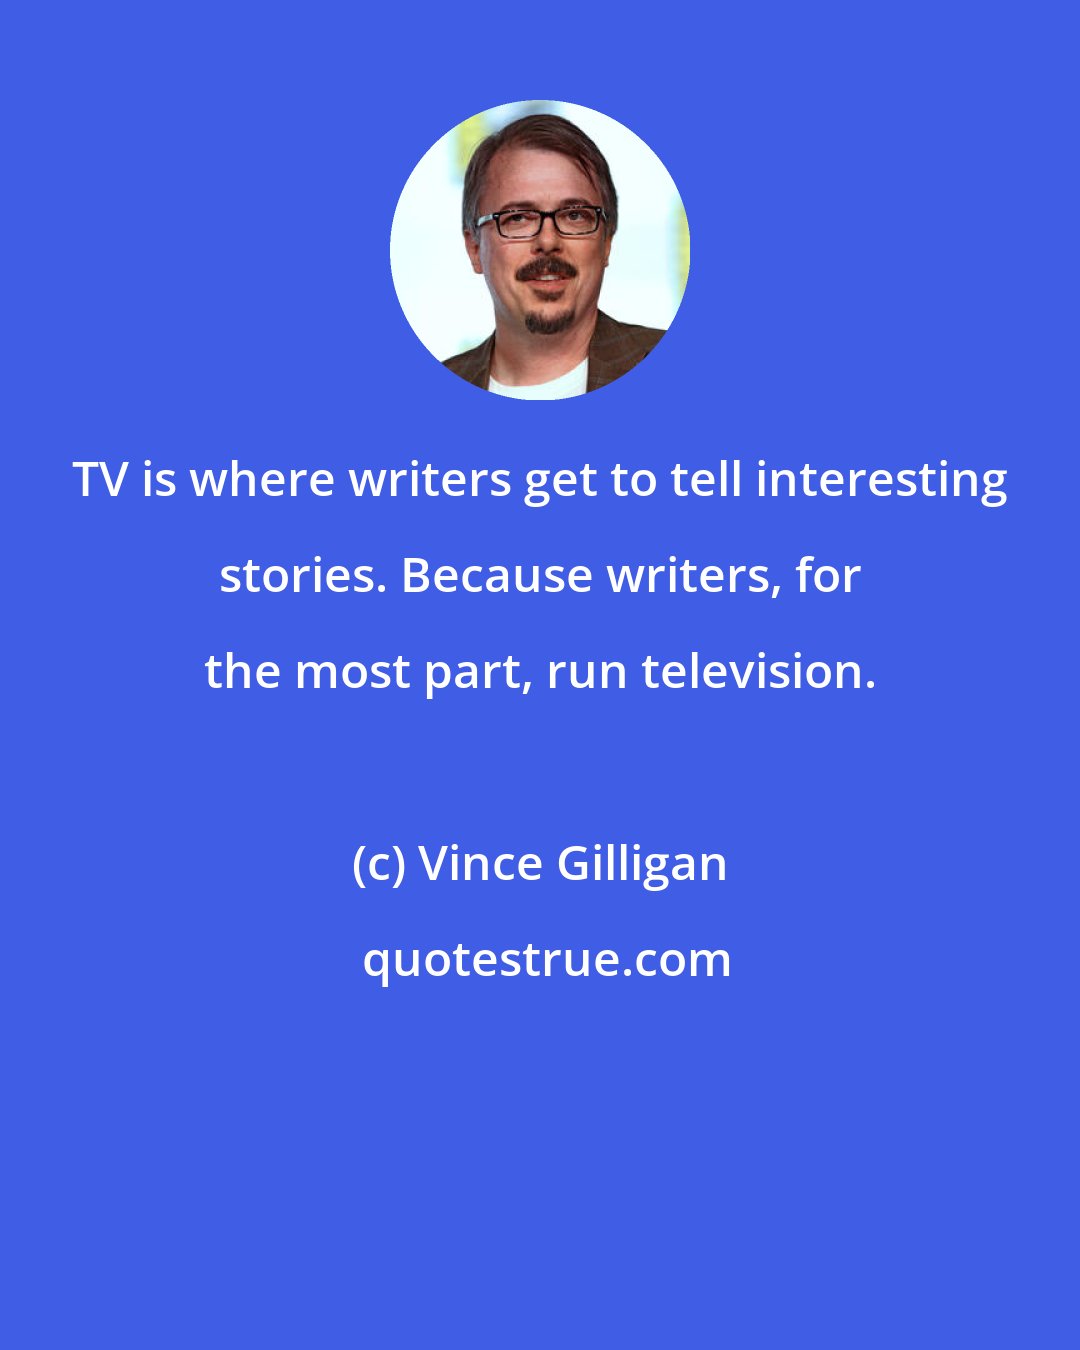 Vince Gilligan: TV is where writers get to tell interesting stories. Because writers, for the most part, run television.